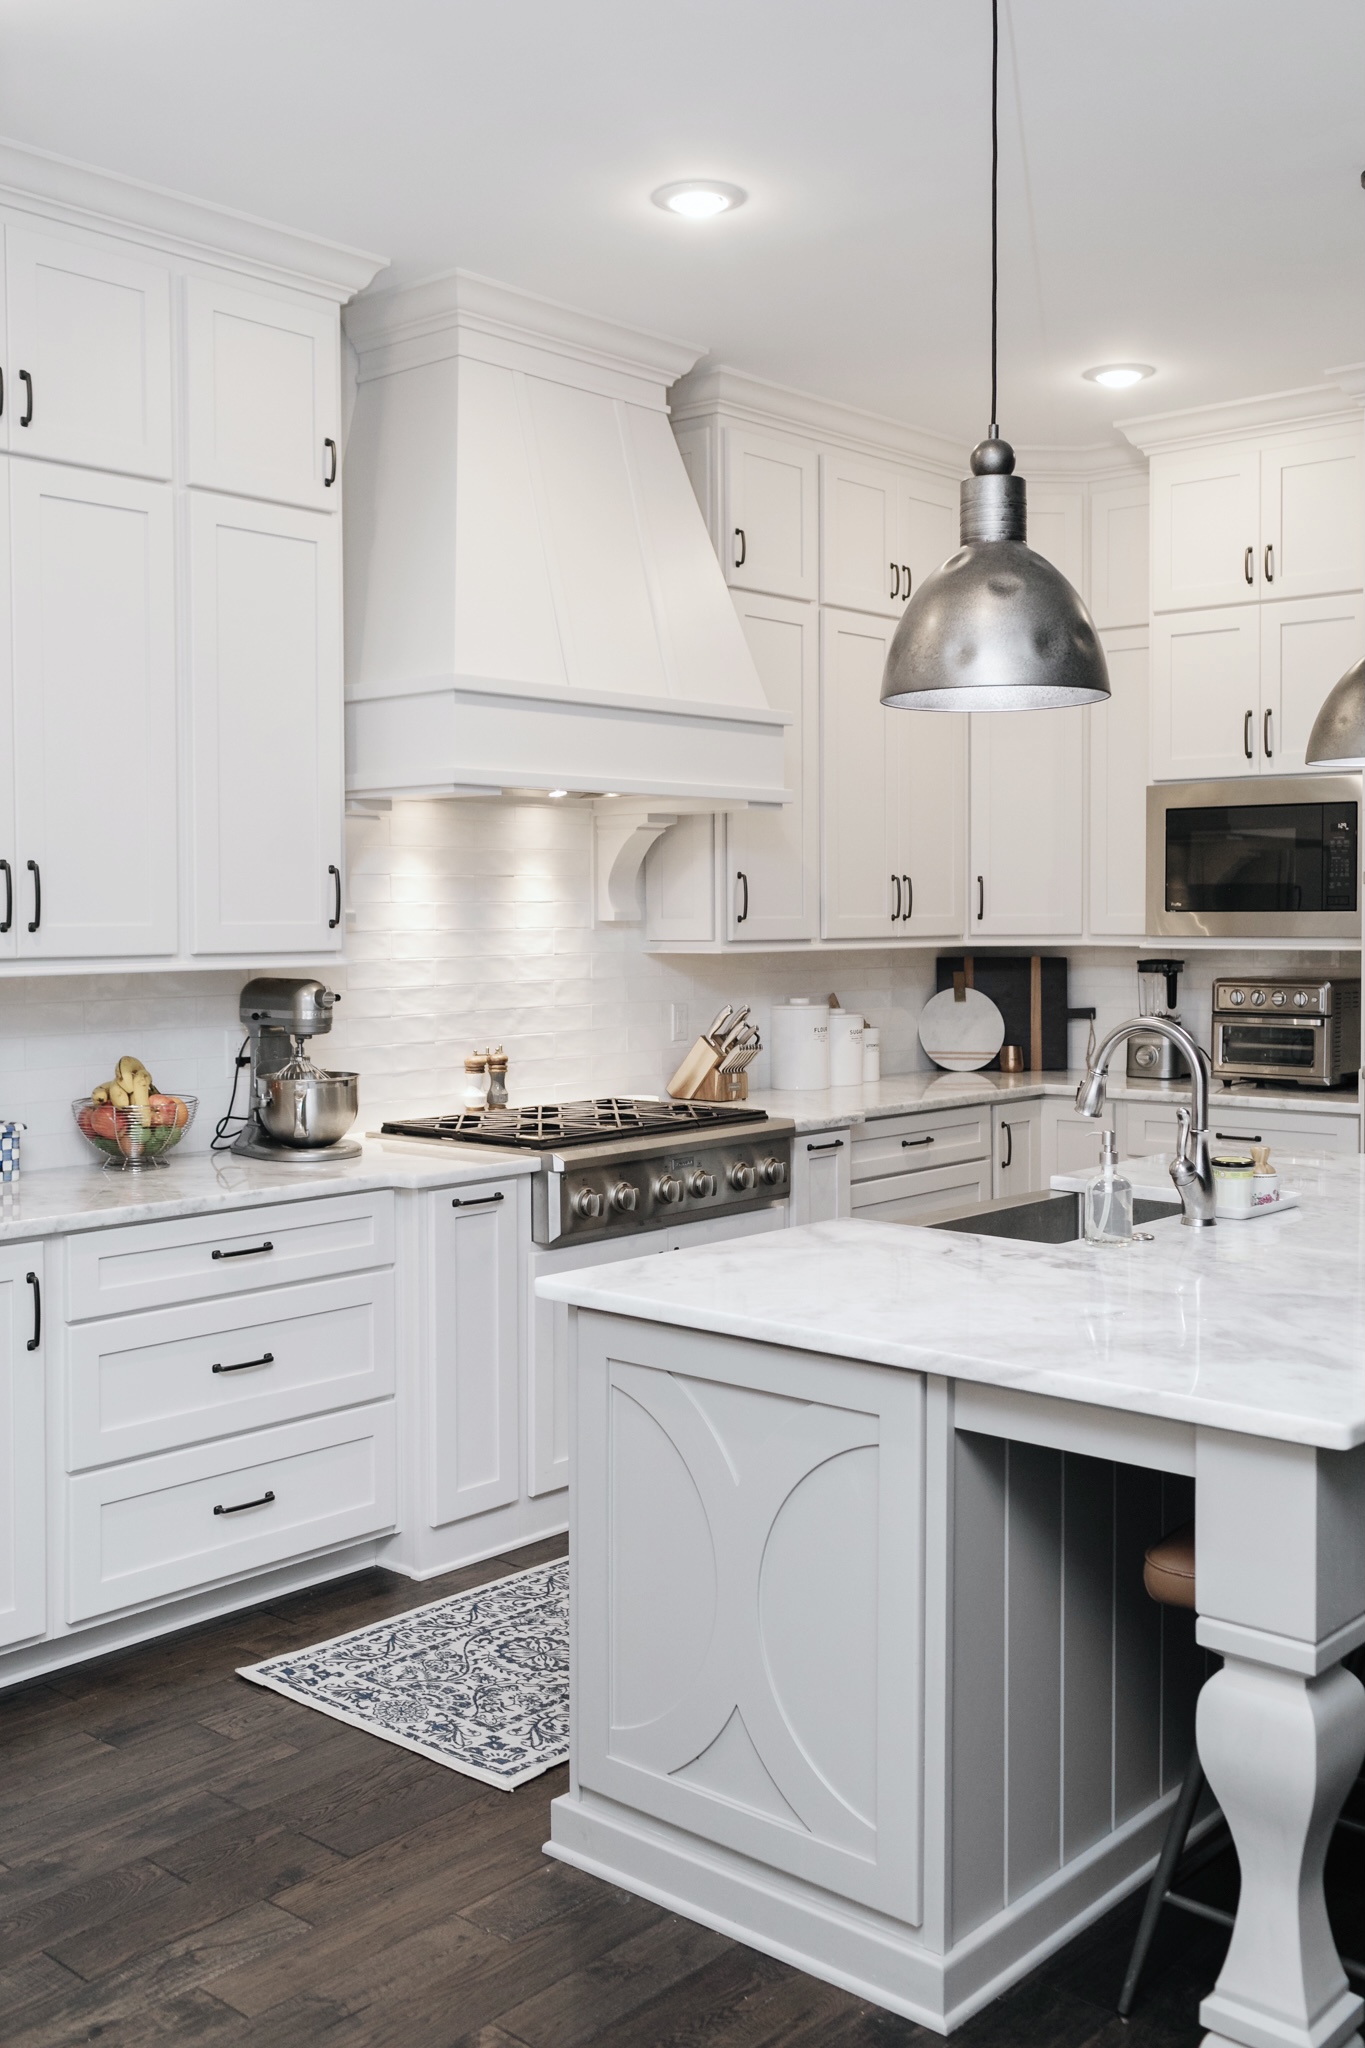 Best Home Appliances for the Kitchen featured by top Memphis lifestyle blogger, Walking in Memphis in High Heels.